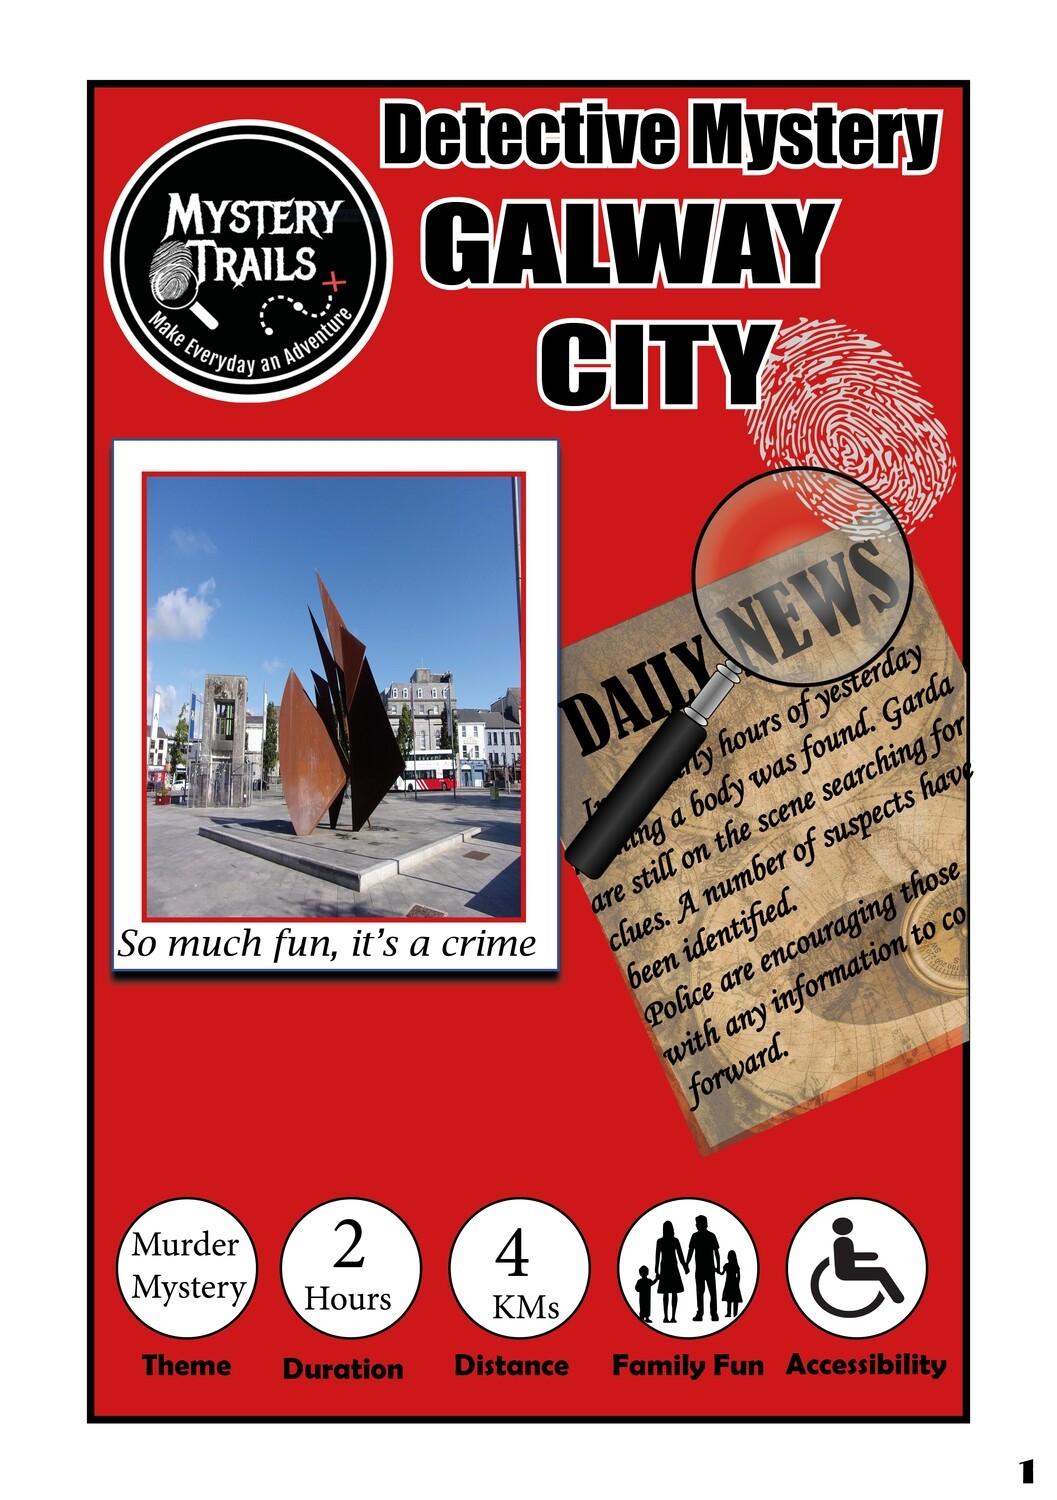 Galway City- Detective Mystery